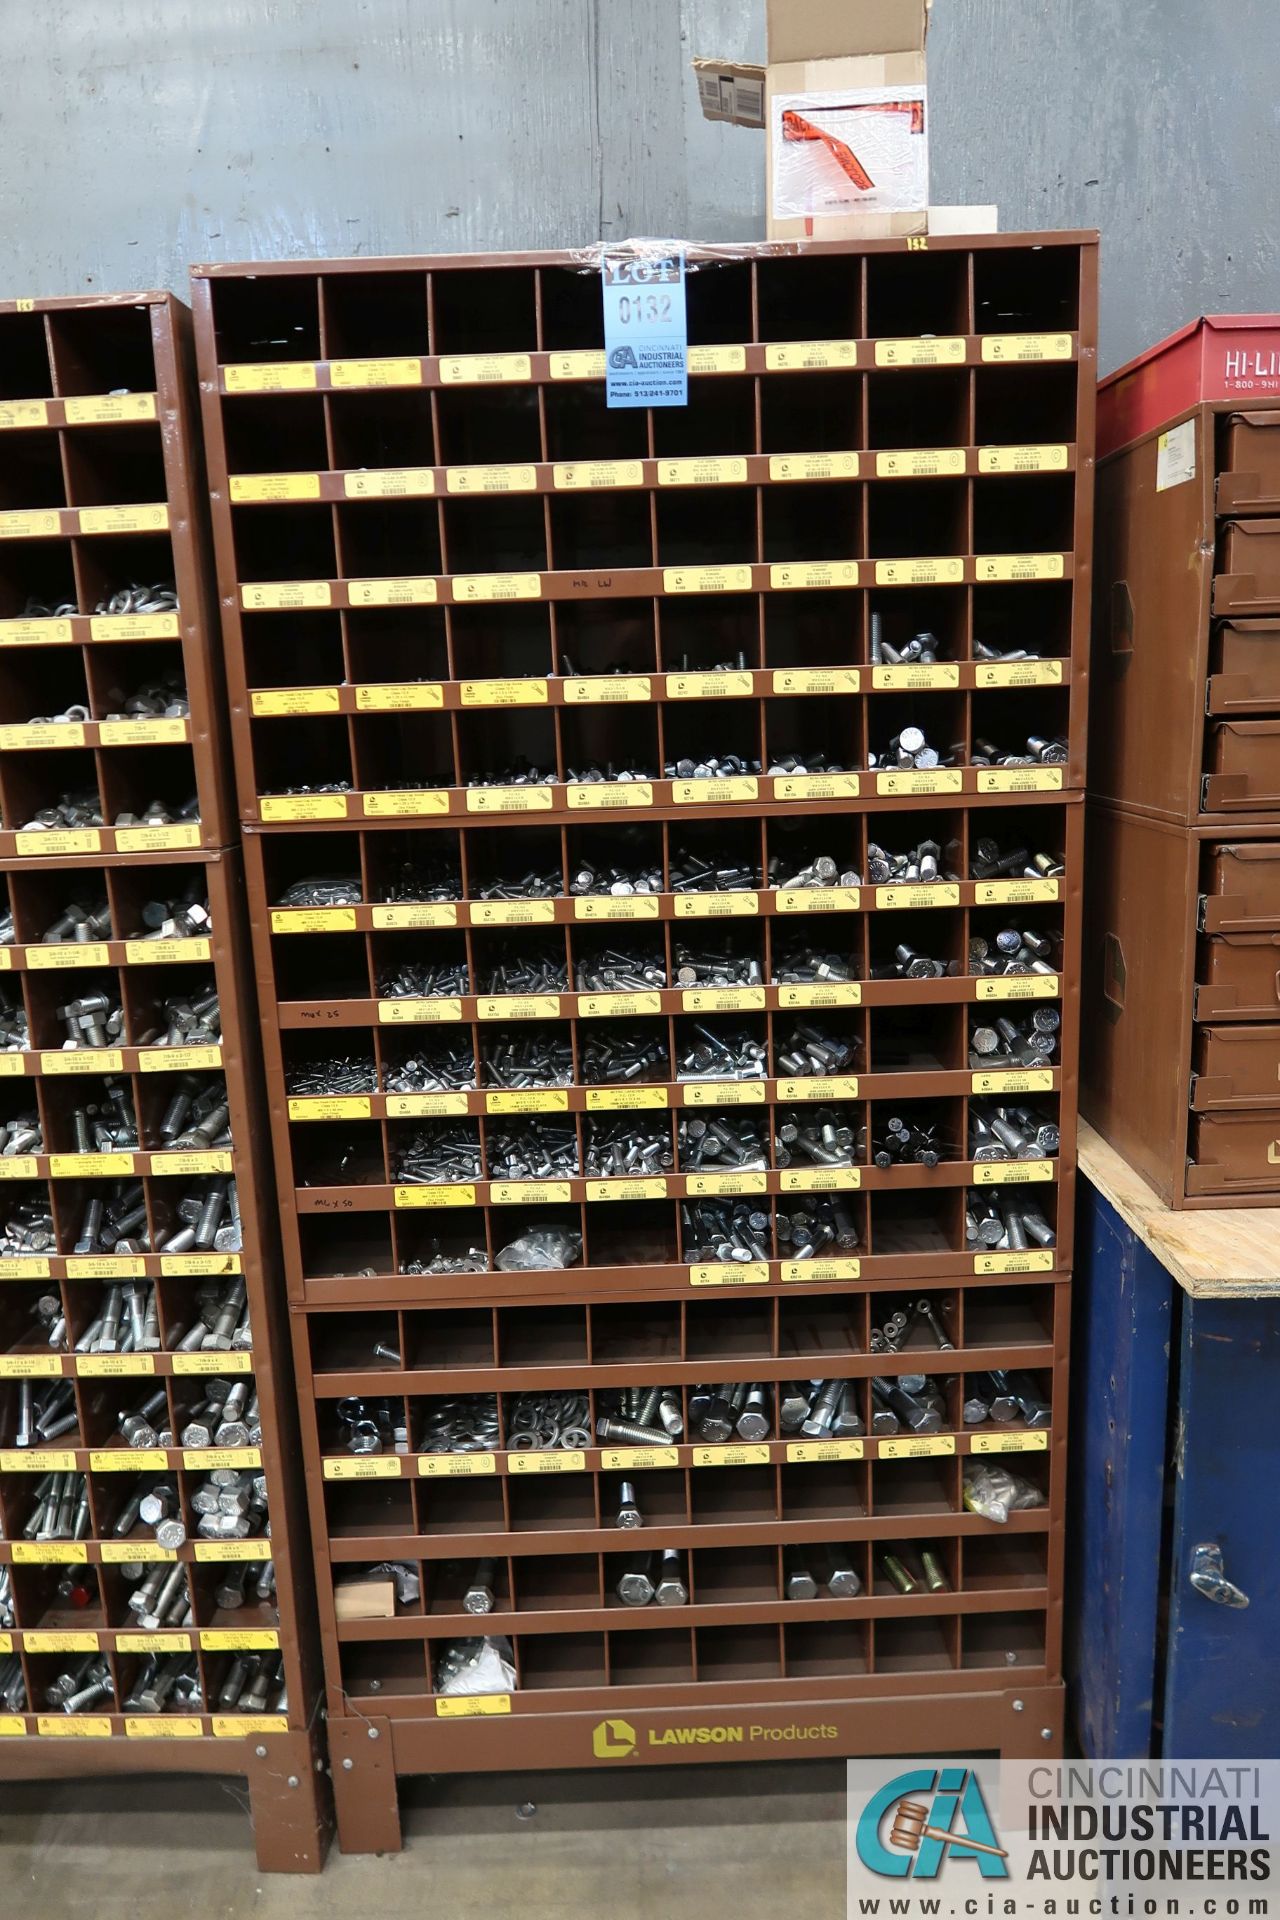 120-COMPARTMENT PIGEON HOLE HARDWARE CABINET WITH MISCELLANEOUS HARDWARE